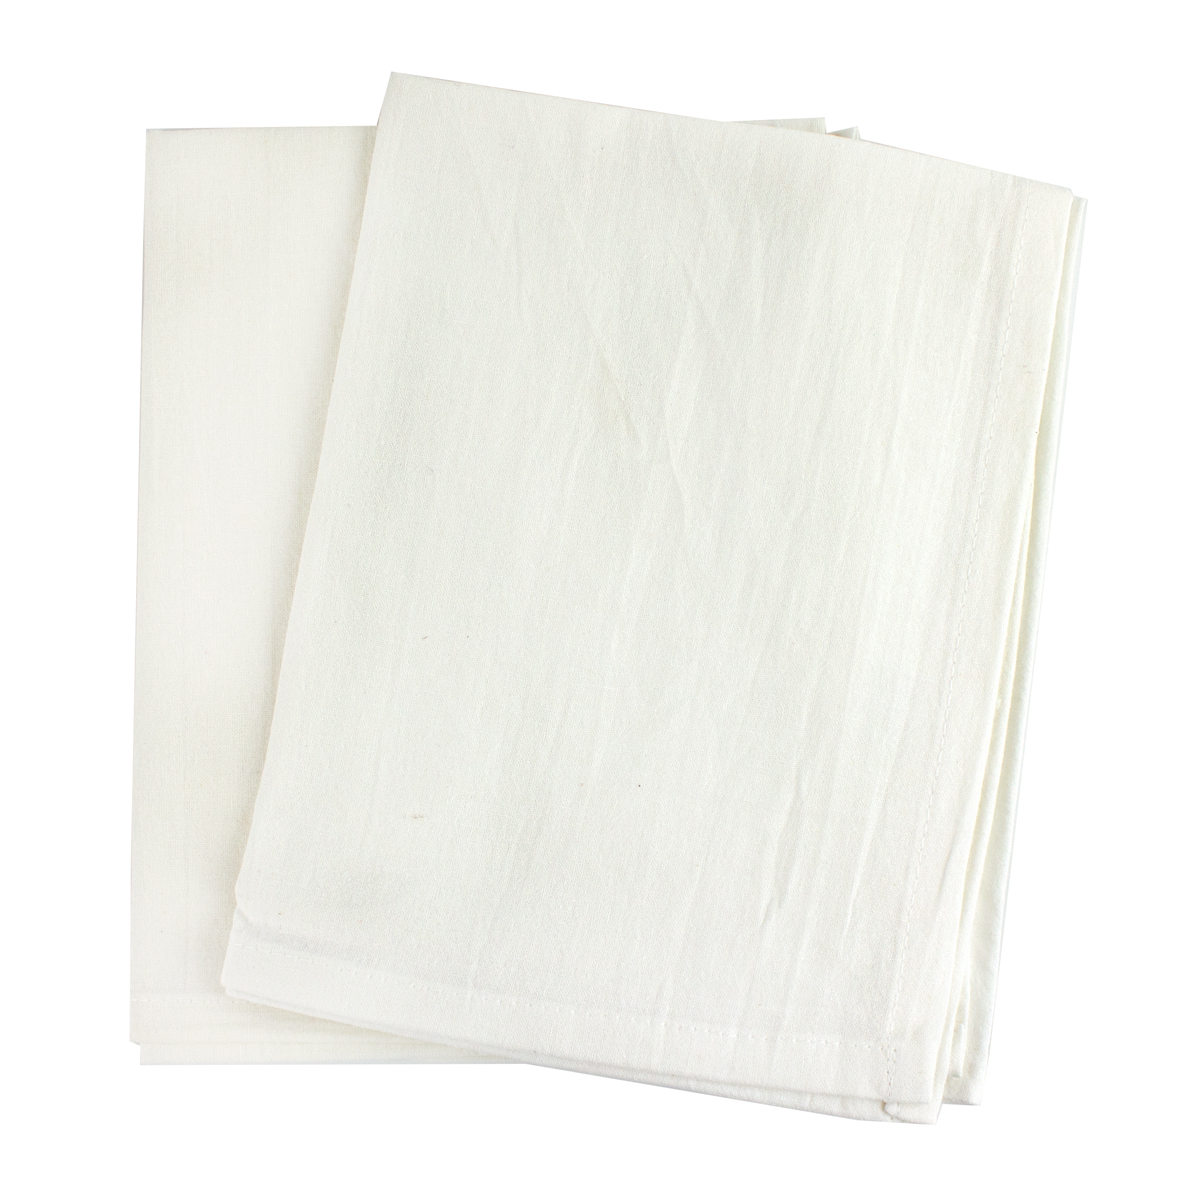 White Flour Sack Towel Blanks - 2-pack Questions & Answers